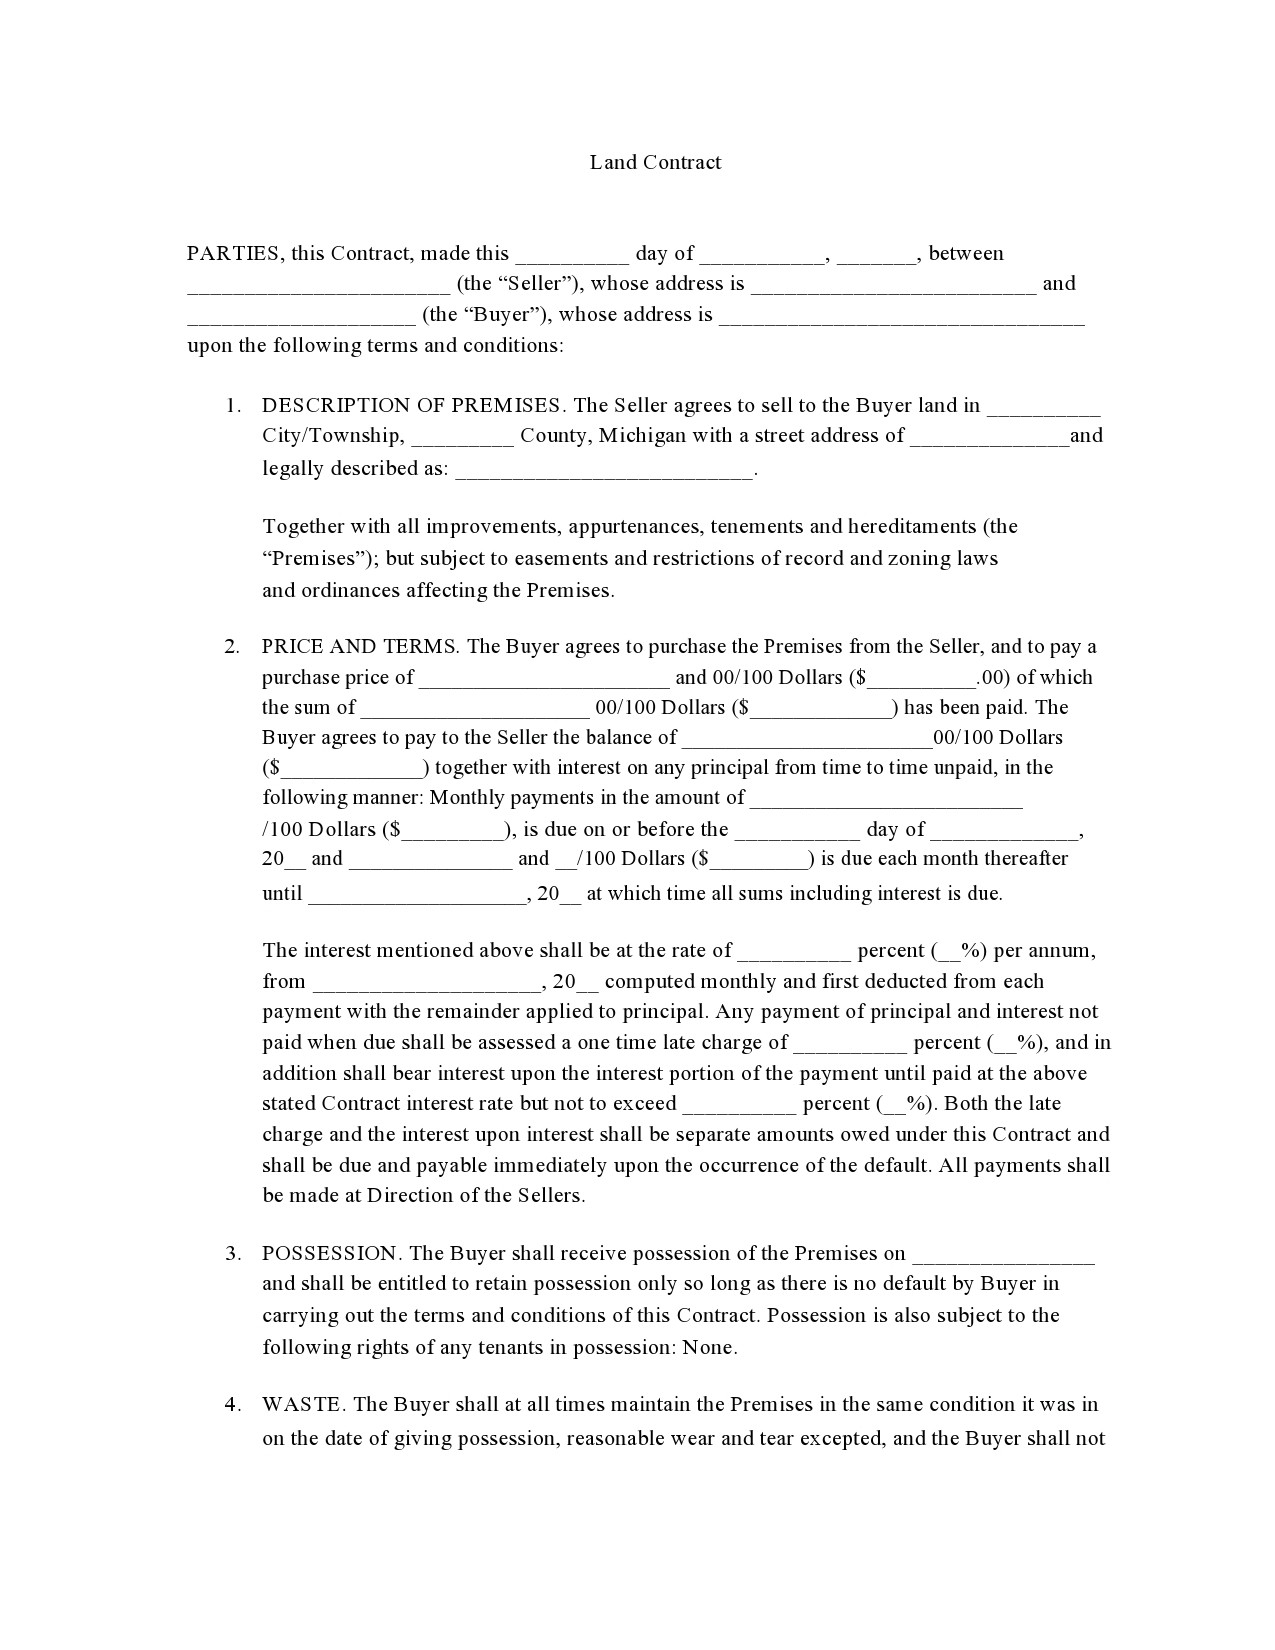 Free land contract form 08